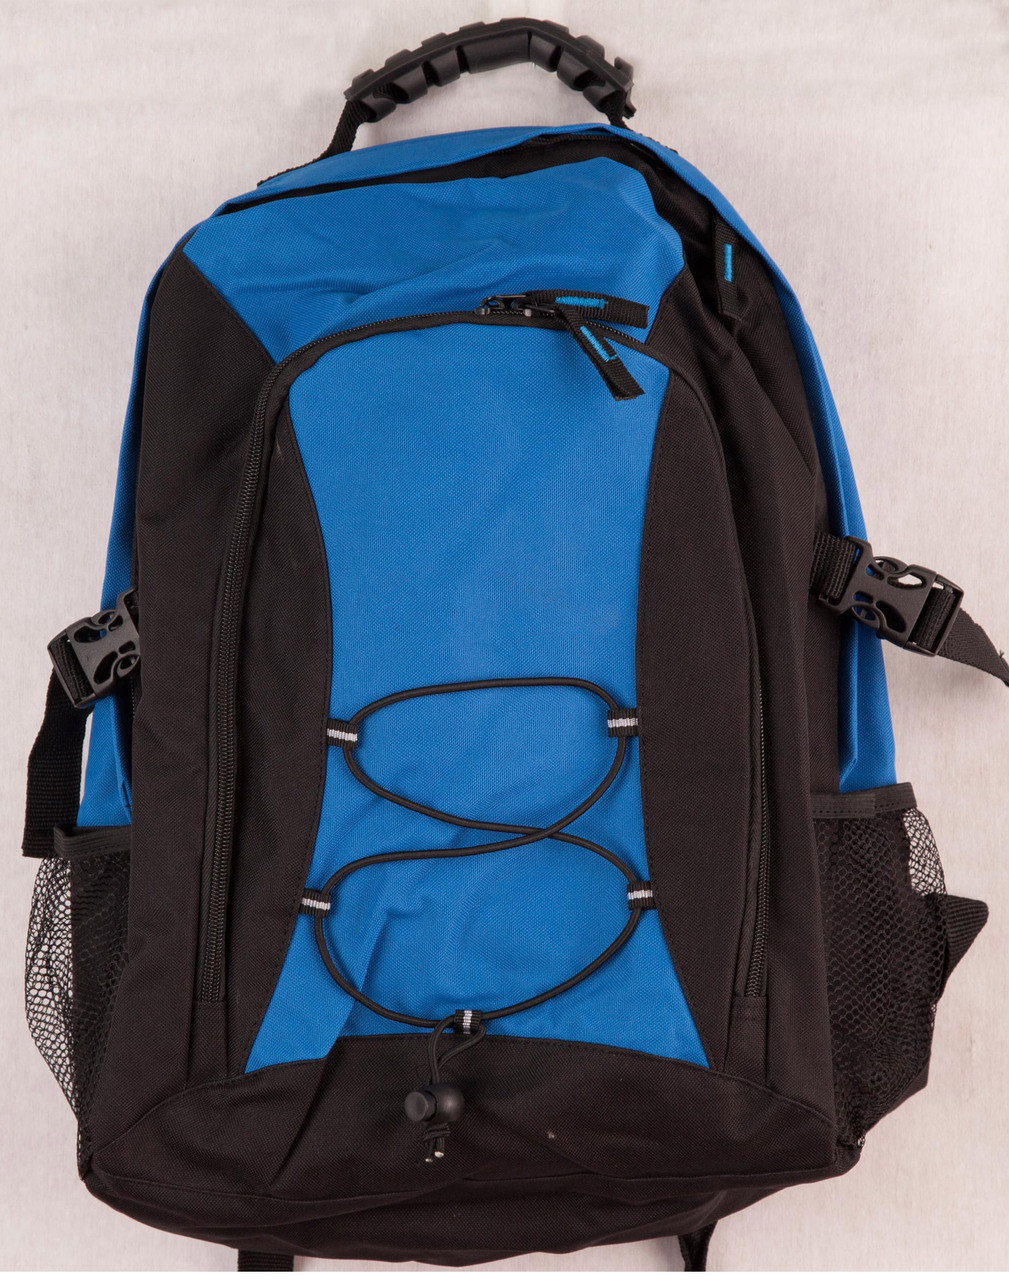 Padded backpack with bungee cord | wholesale plain bags & backpacks